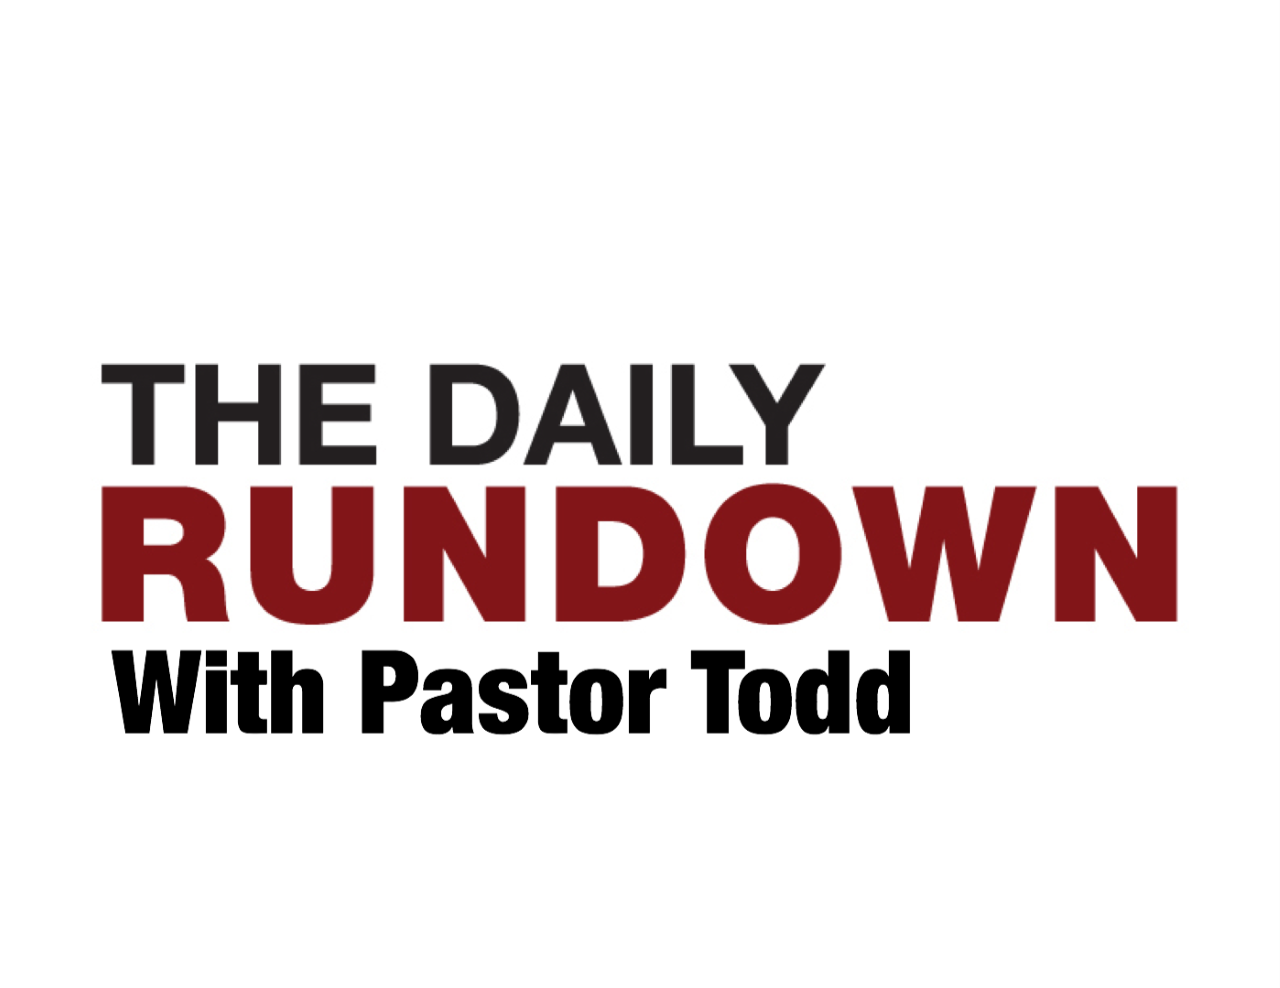 Remnant News: Daily Rundown with Pastor Todd 8/3/2020